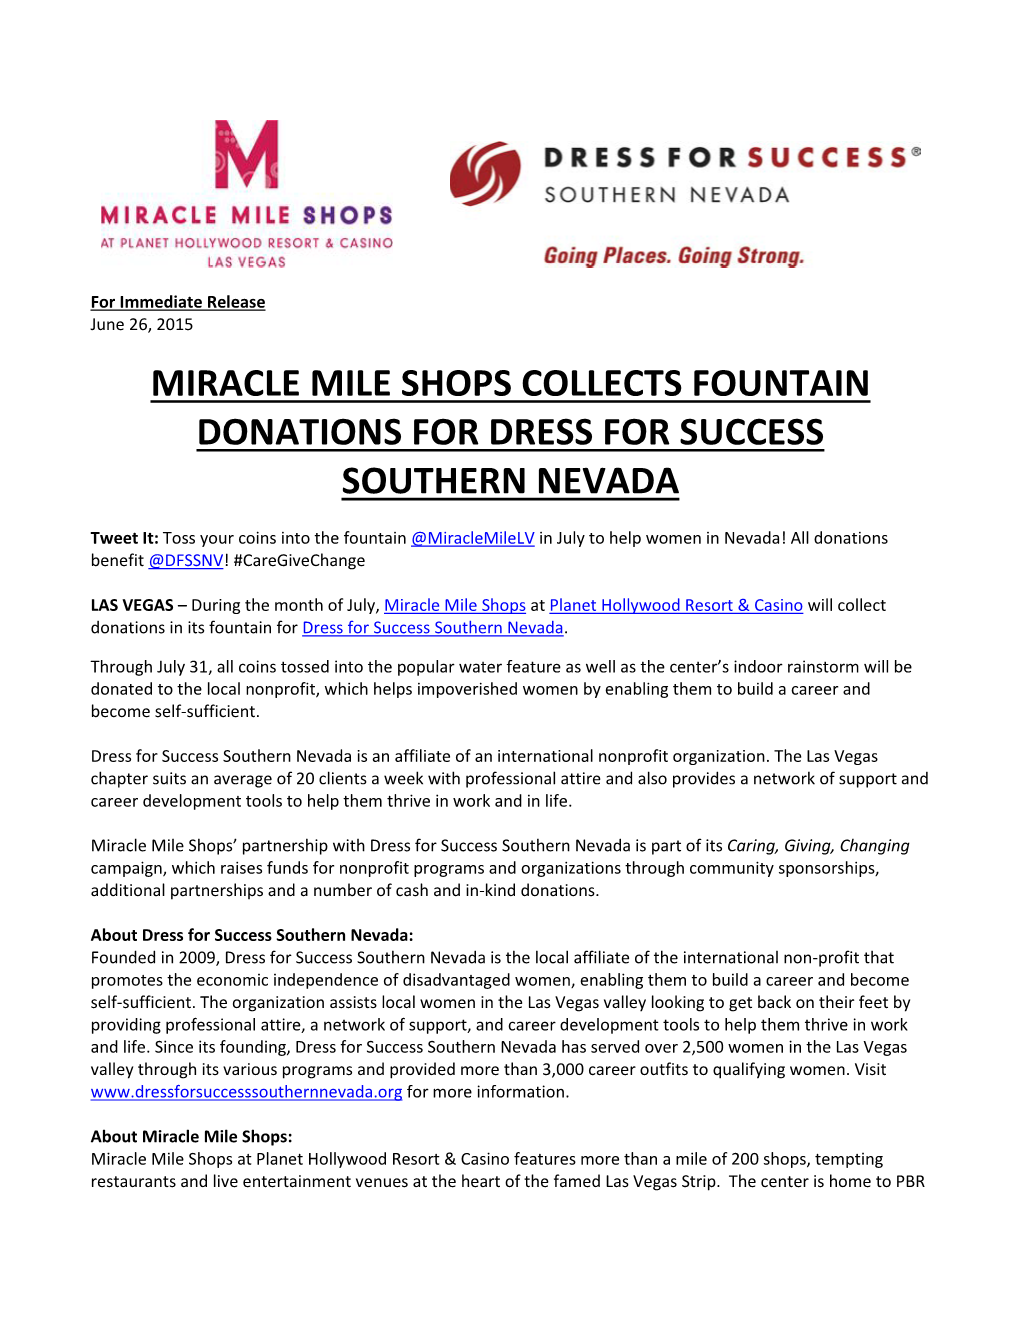 Miracle Mile Shops Collects Fountain Donations for Dress for Success Southern Nevada